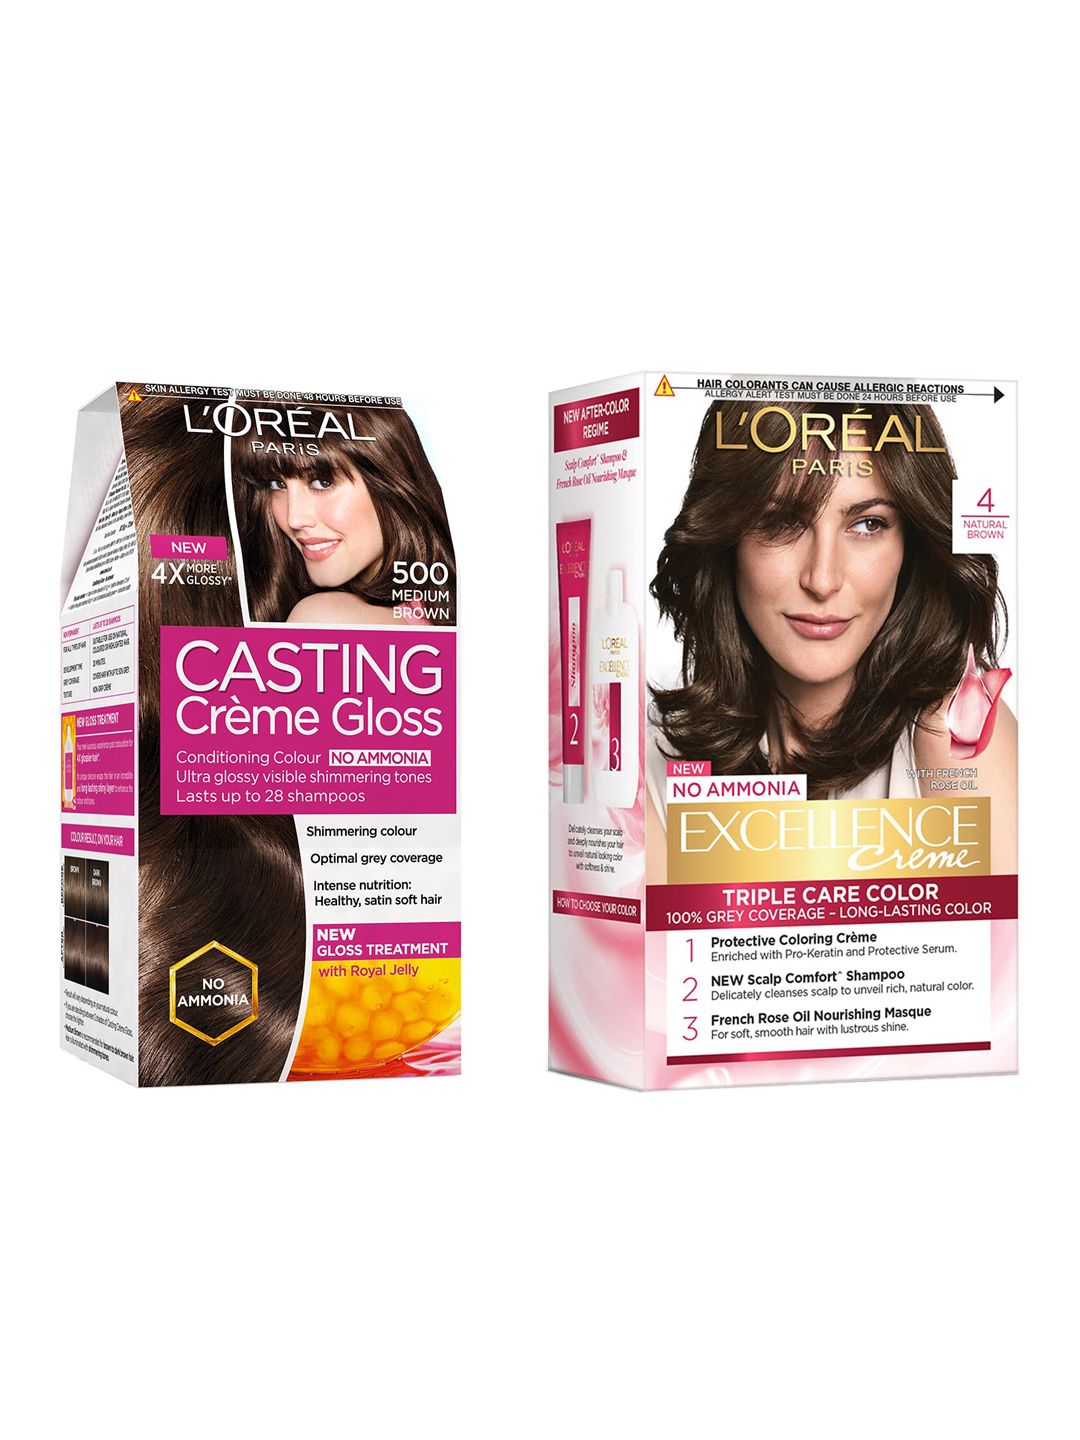 LOreal Paris Set of Casting Creme Gloss & Excellence Natural Hair Color Price in India